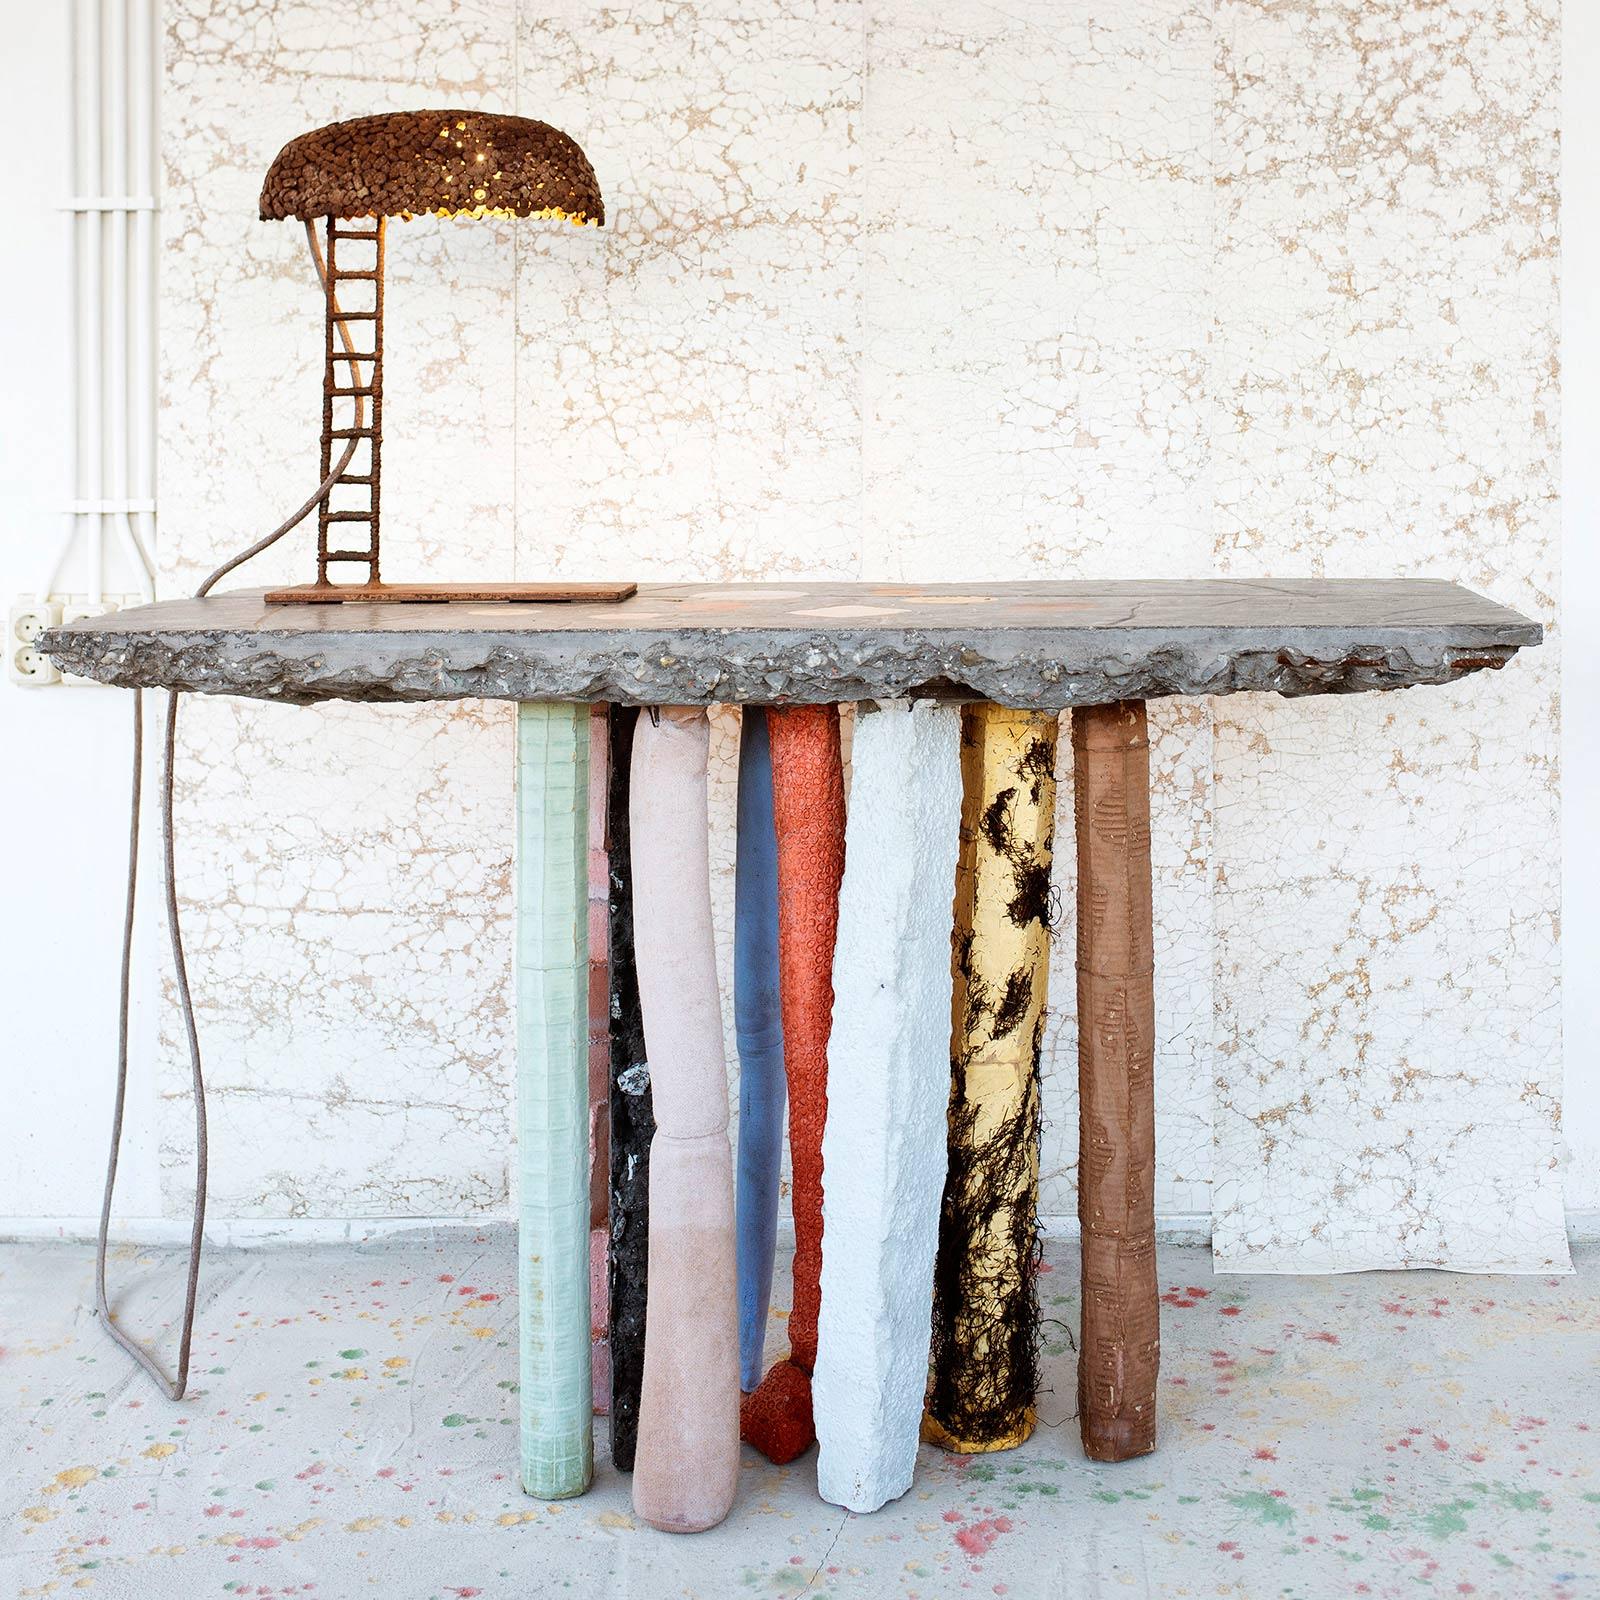 Contemporary Fossil Console in Concrete by Nacho Carbonell